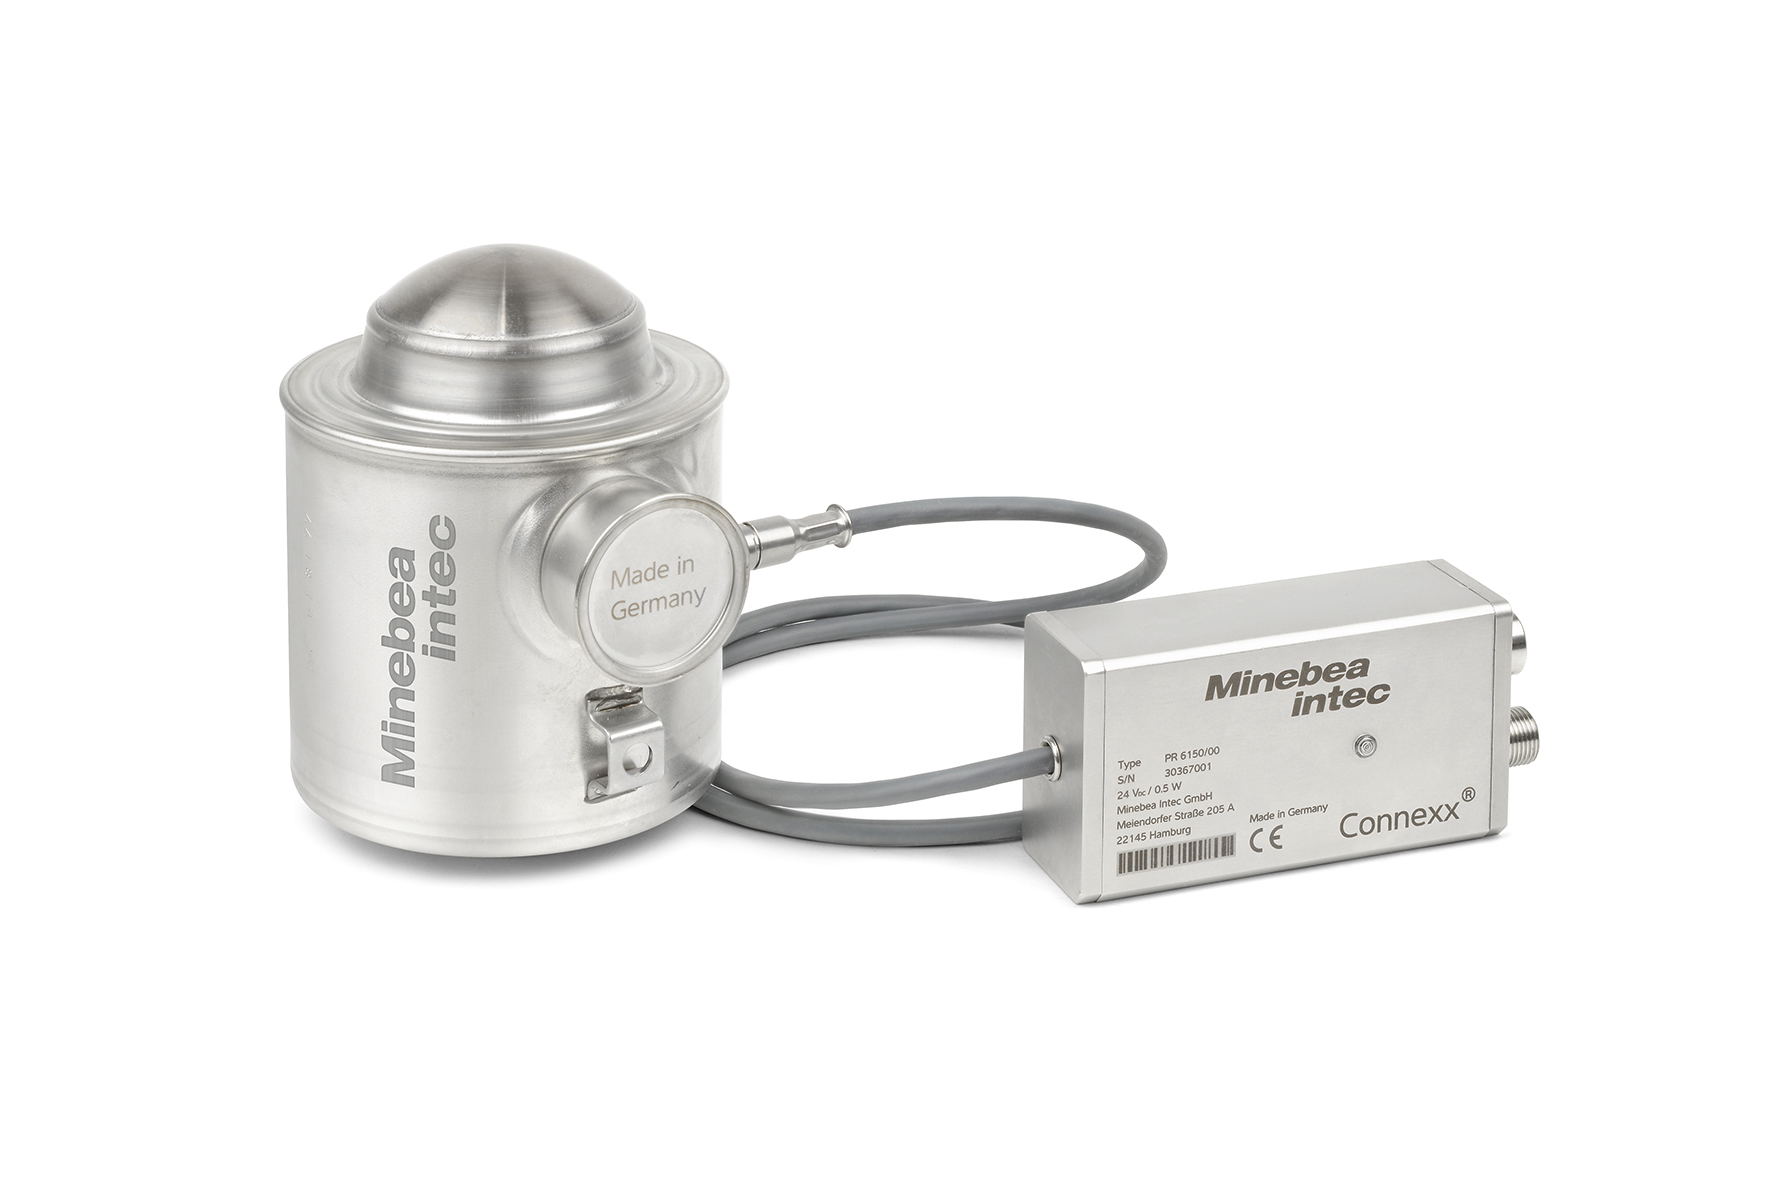 Minebea Intec Load Cell Inteco® with converter Connexx®